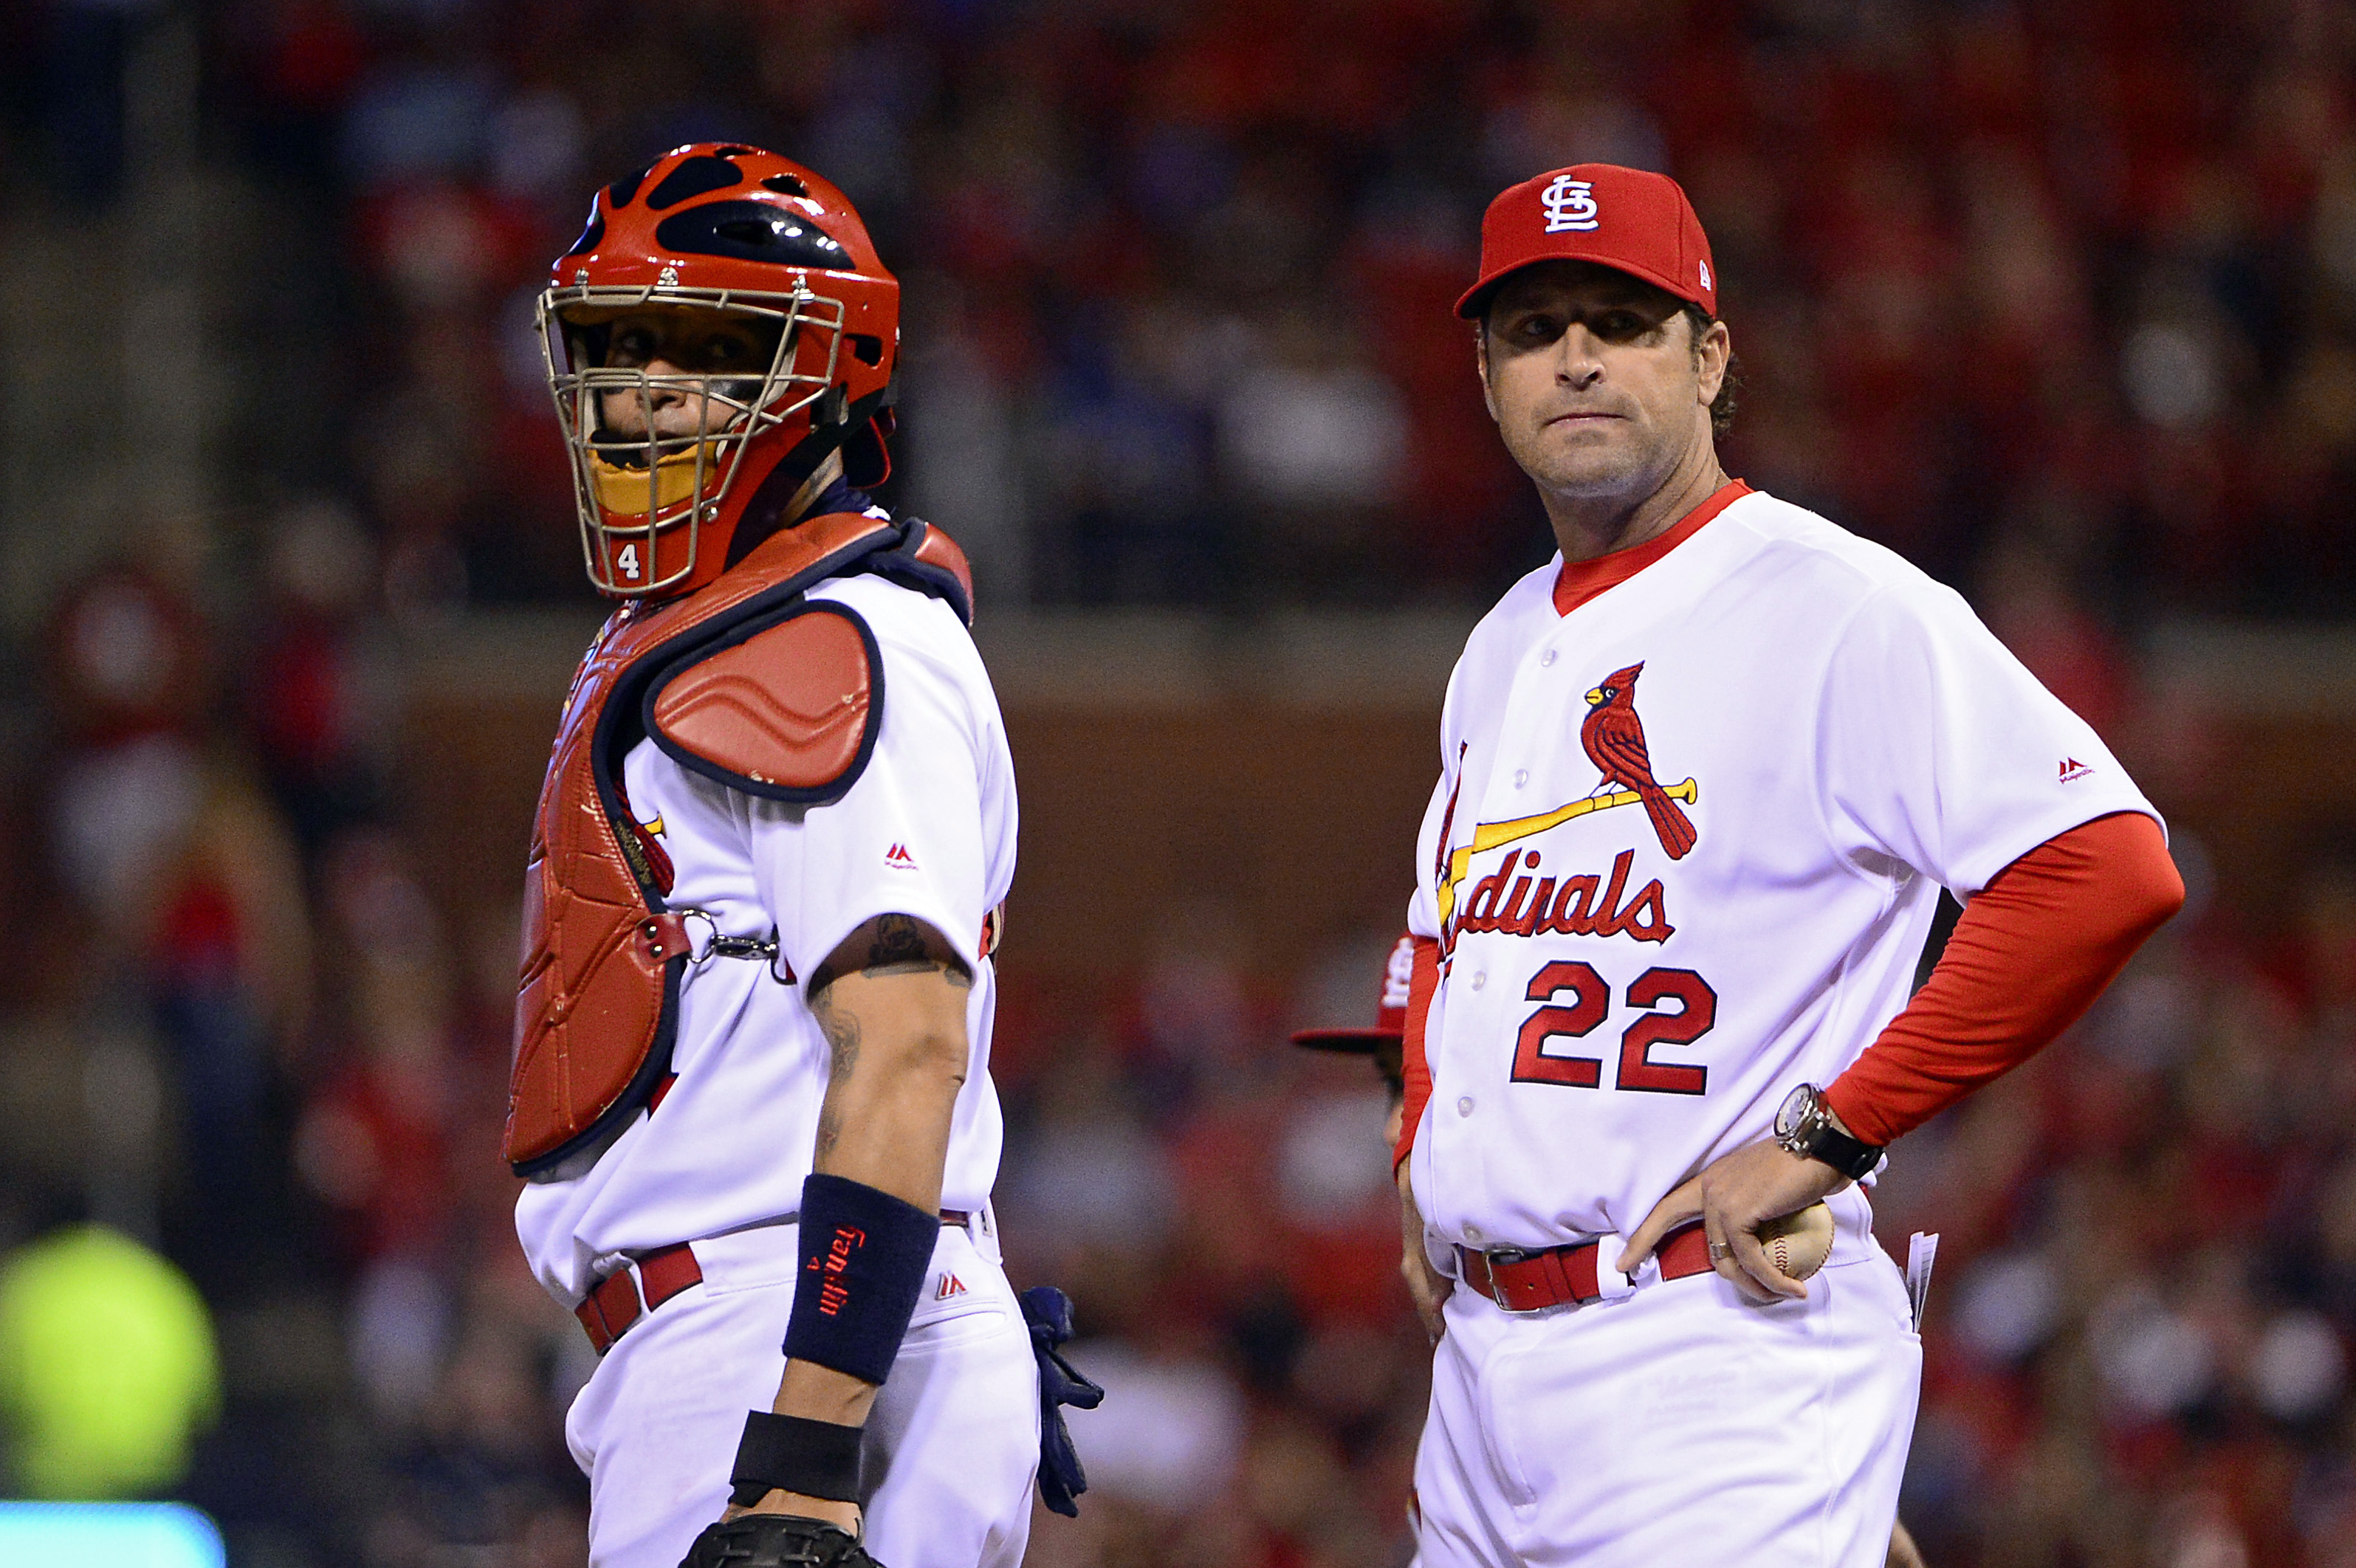 Yadier Molina calls out manager Mike Matheny on Instagram